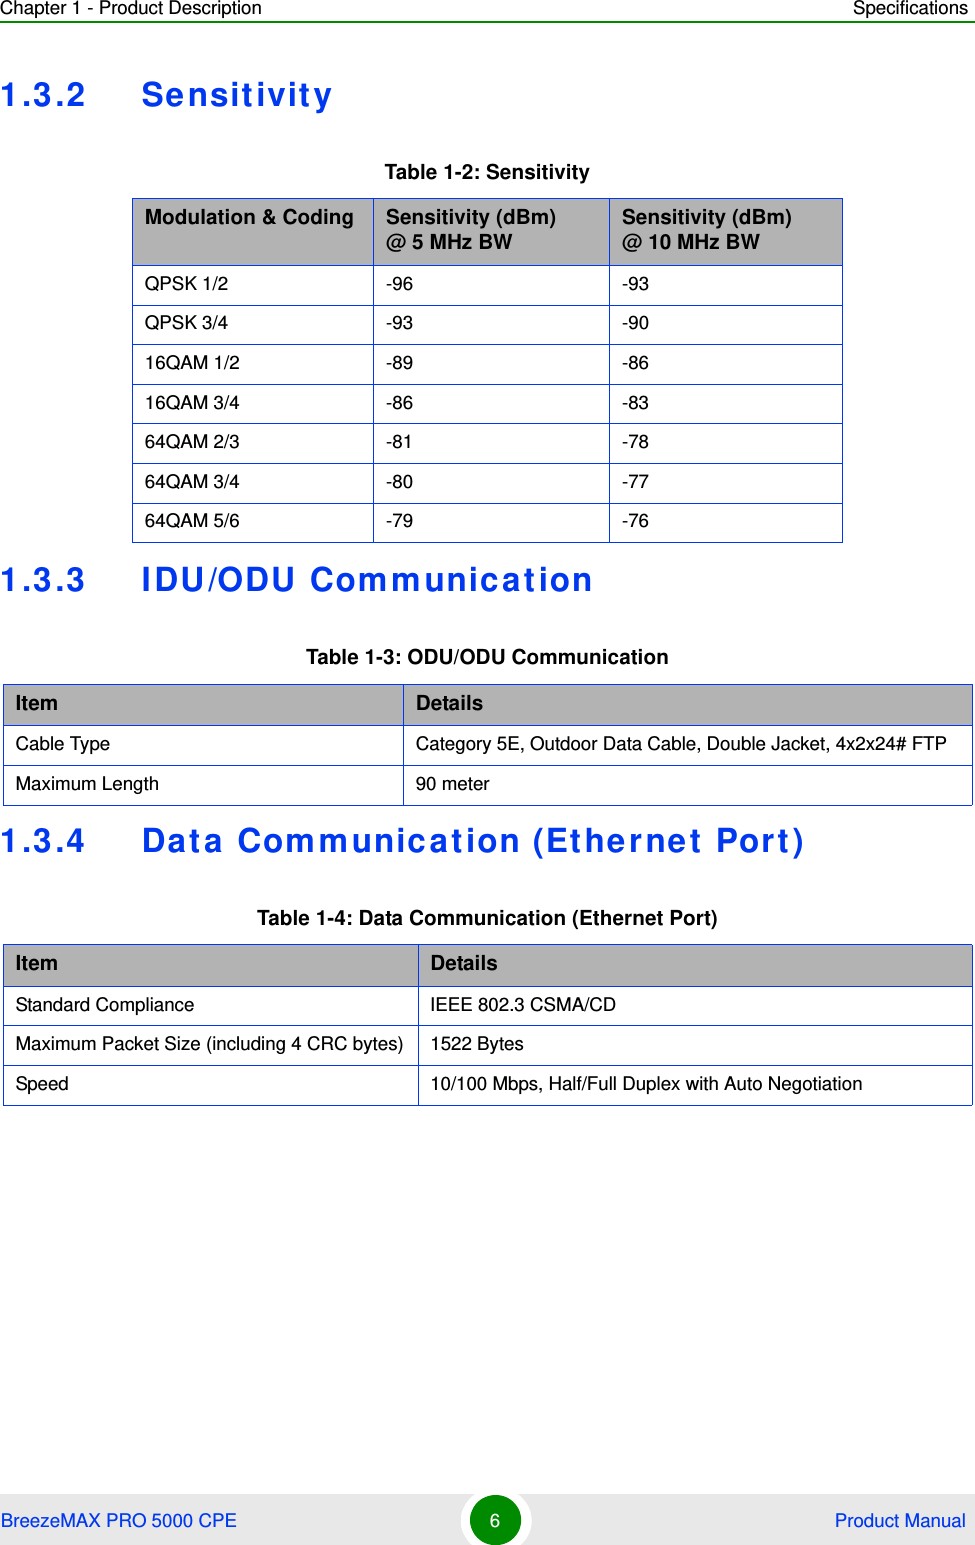 Chapter 1 - Product Description SpecificationsBreezeMAX PRO 5000 CPE 6 Product Manual1.3.2 Sensitivity1.3.3 IDU/ODU Communication1.3.4 Data Communication (Ethernet Port)Table 1-2: SensitivityModulation &amp; Coding Sensitivity (dBm)@ 5 MHz BW Sensitivity (dBm)@ 10 MHz BWQPSK 1/2 -96 -93QPSK 3/4 -93 -9016QAM 1/2 -89 -8616QAM 3/4 -86 -8364QAM 2/3 -81 -7864QAM 3/4 -80 -7764QAM 5/6 -79 -76Table 1-3: ODU/ODU CommunicationItem DetailsCable Type Category 5E, Outdoor Data Cable, Double Jacket, 4x2x24# FTPMaximum Length 90 meter Table 1-4: Data Communication (Ethernet Port)Item DetailsStandard Compliance IEEE 802.3 CSMA/CDMaximum Packet Size (including 4 CRC bytes) 1522 BytesSpeed 10/100 Mbps, Half/Full Duplex with Auto Negotiation